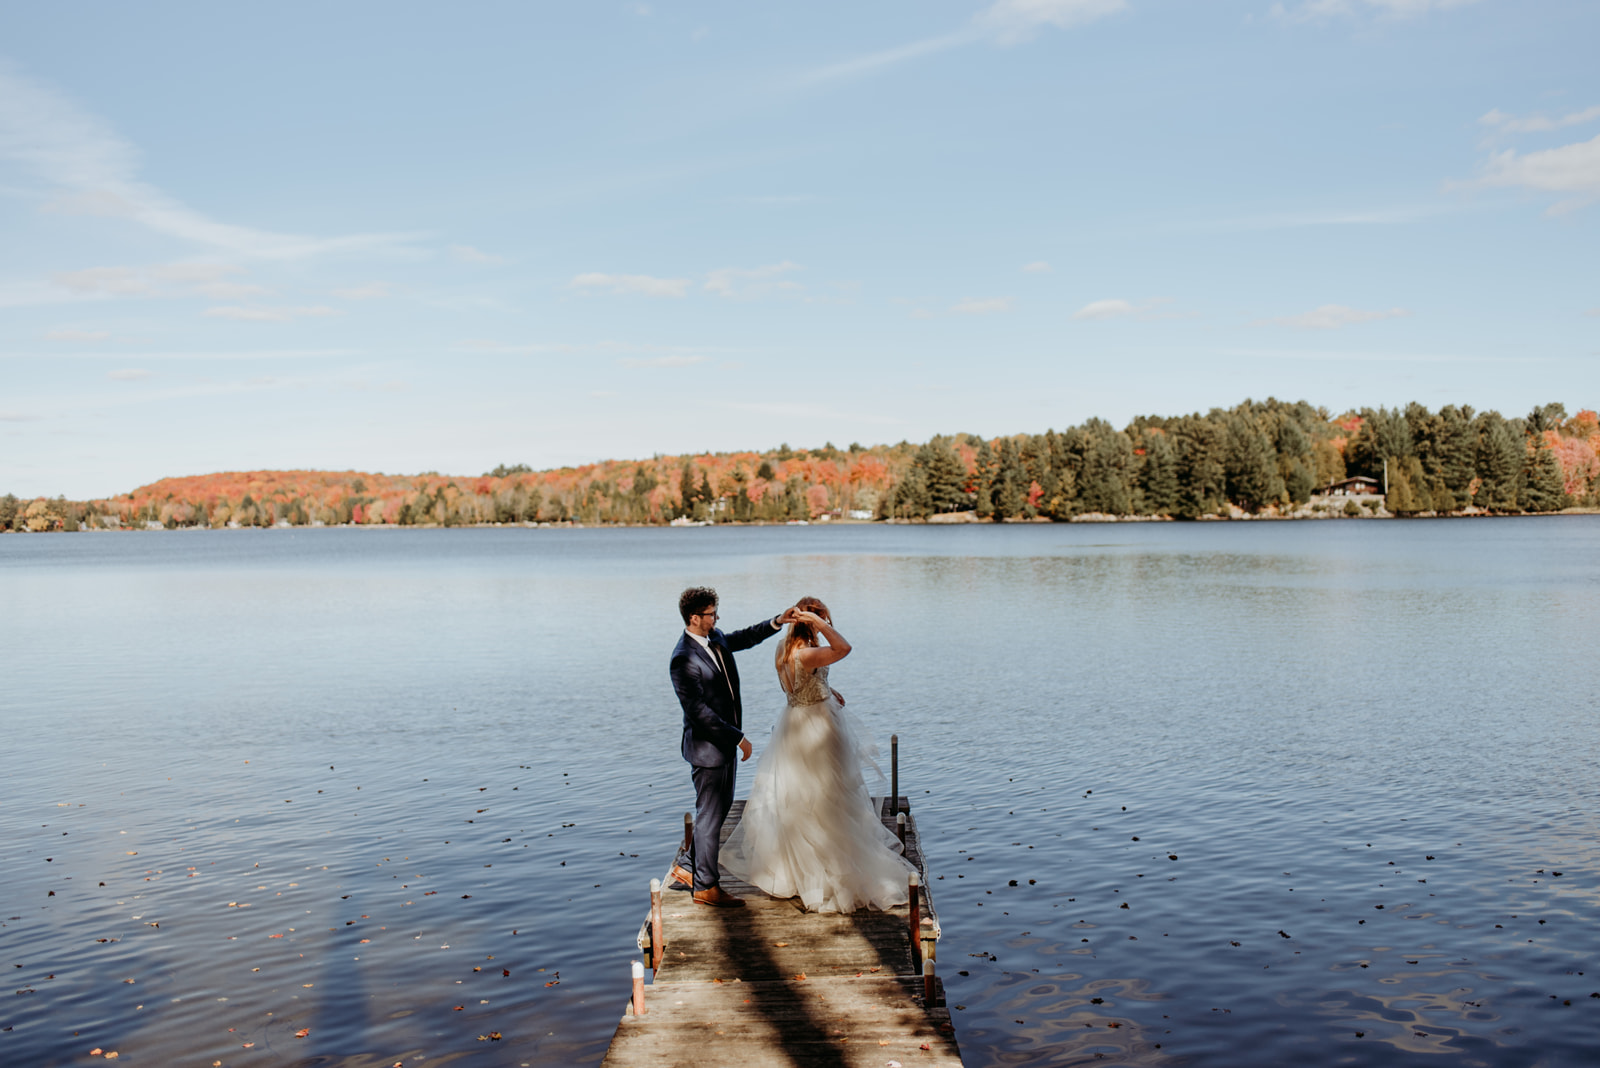 A bride and groom on their honeymoon dancing at the end of a dock with fall colours across the lake.